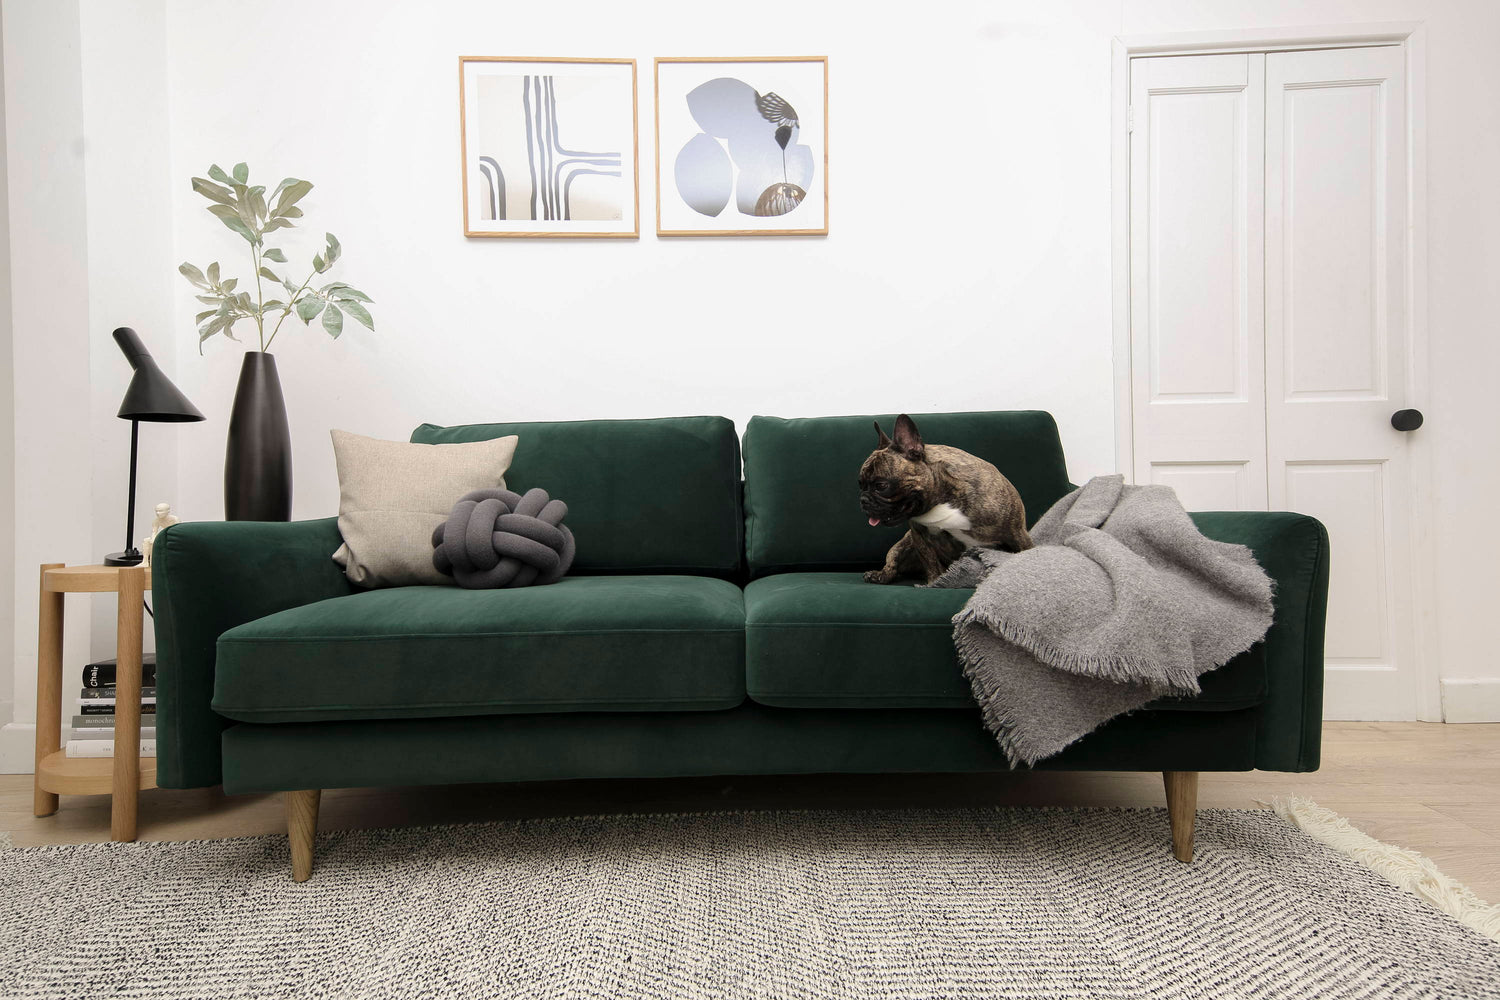  Pet-friendly Sofas? Here's Everything You Need to Know 